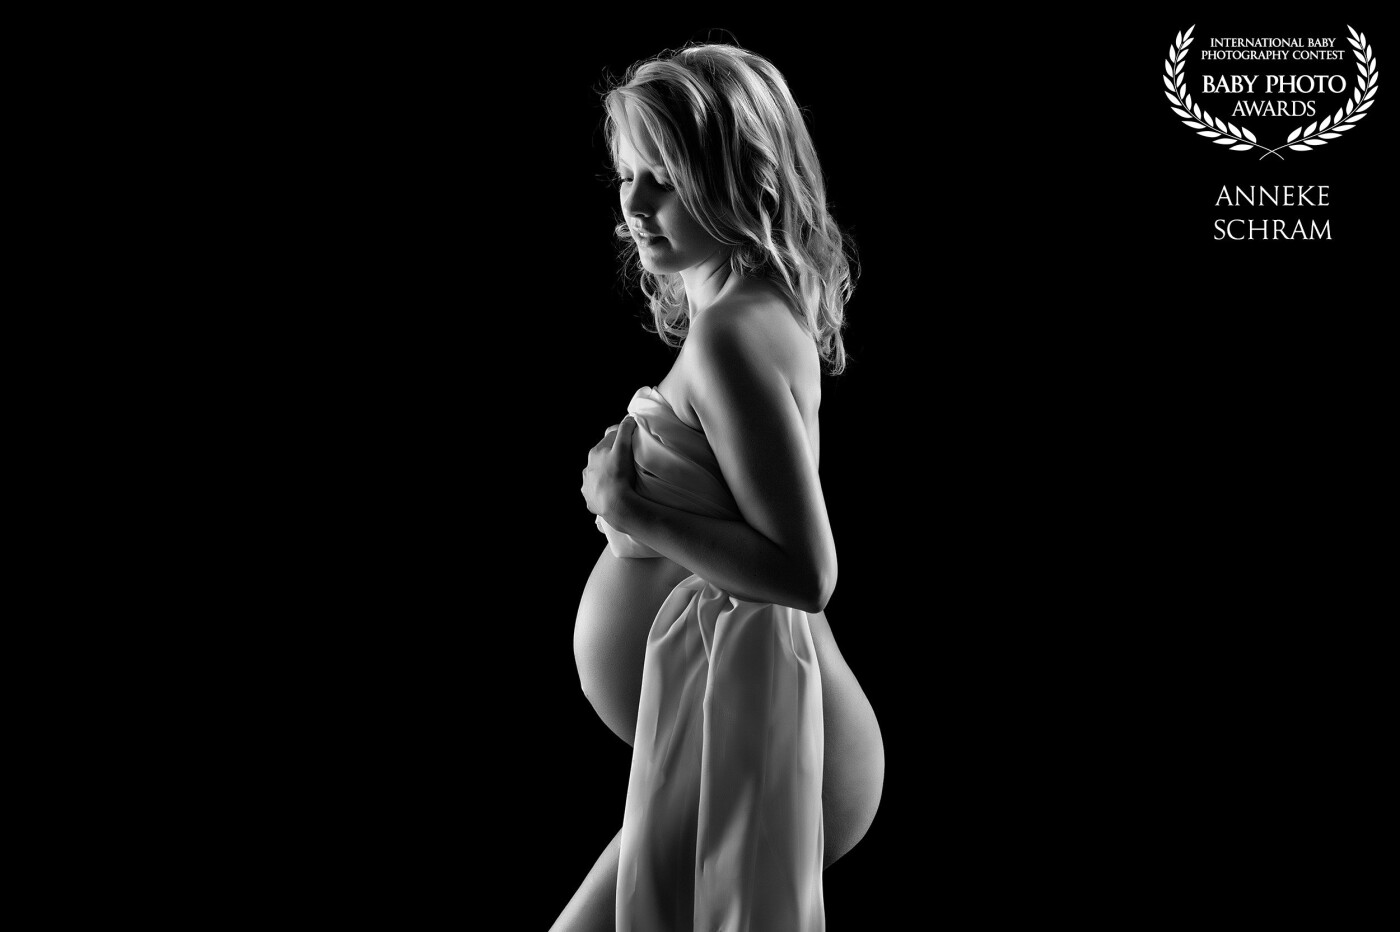 A very simple light setup of two gridded strip lights left and right of this beautiful mom-to-be.  This image was the best one in a series, as I really like the balance front/behind created by the fabric.